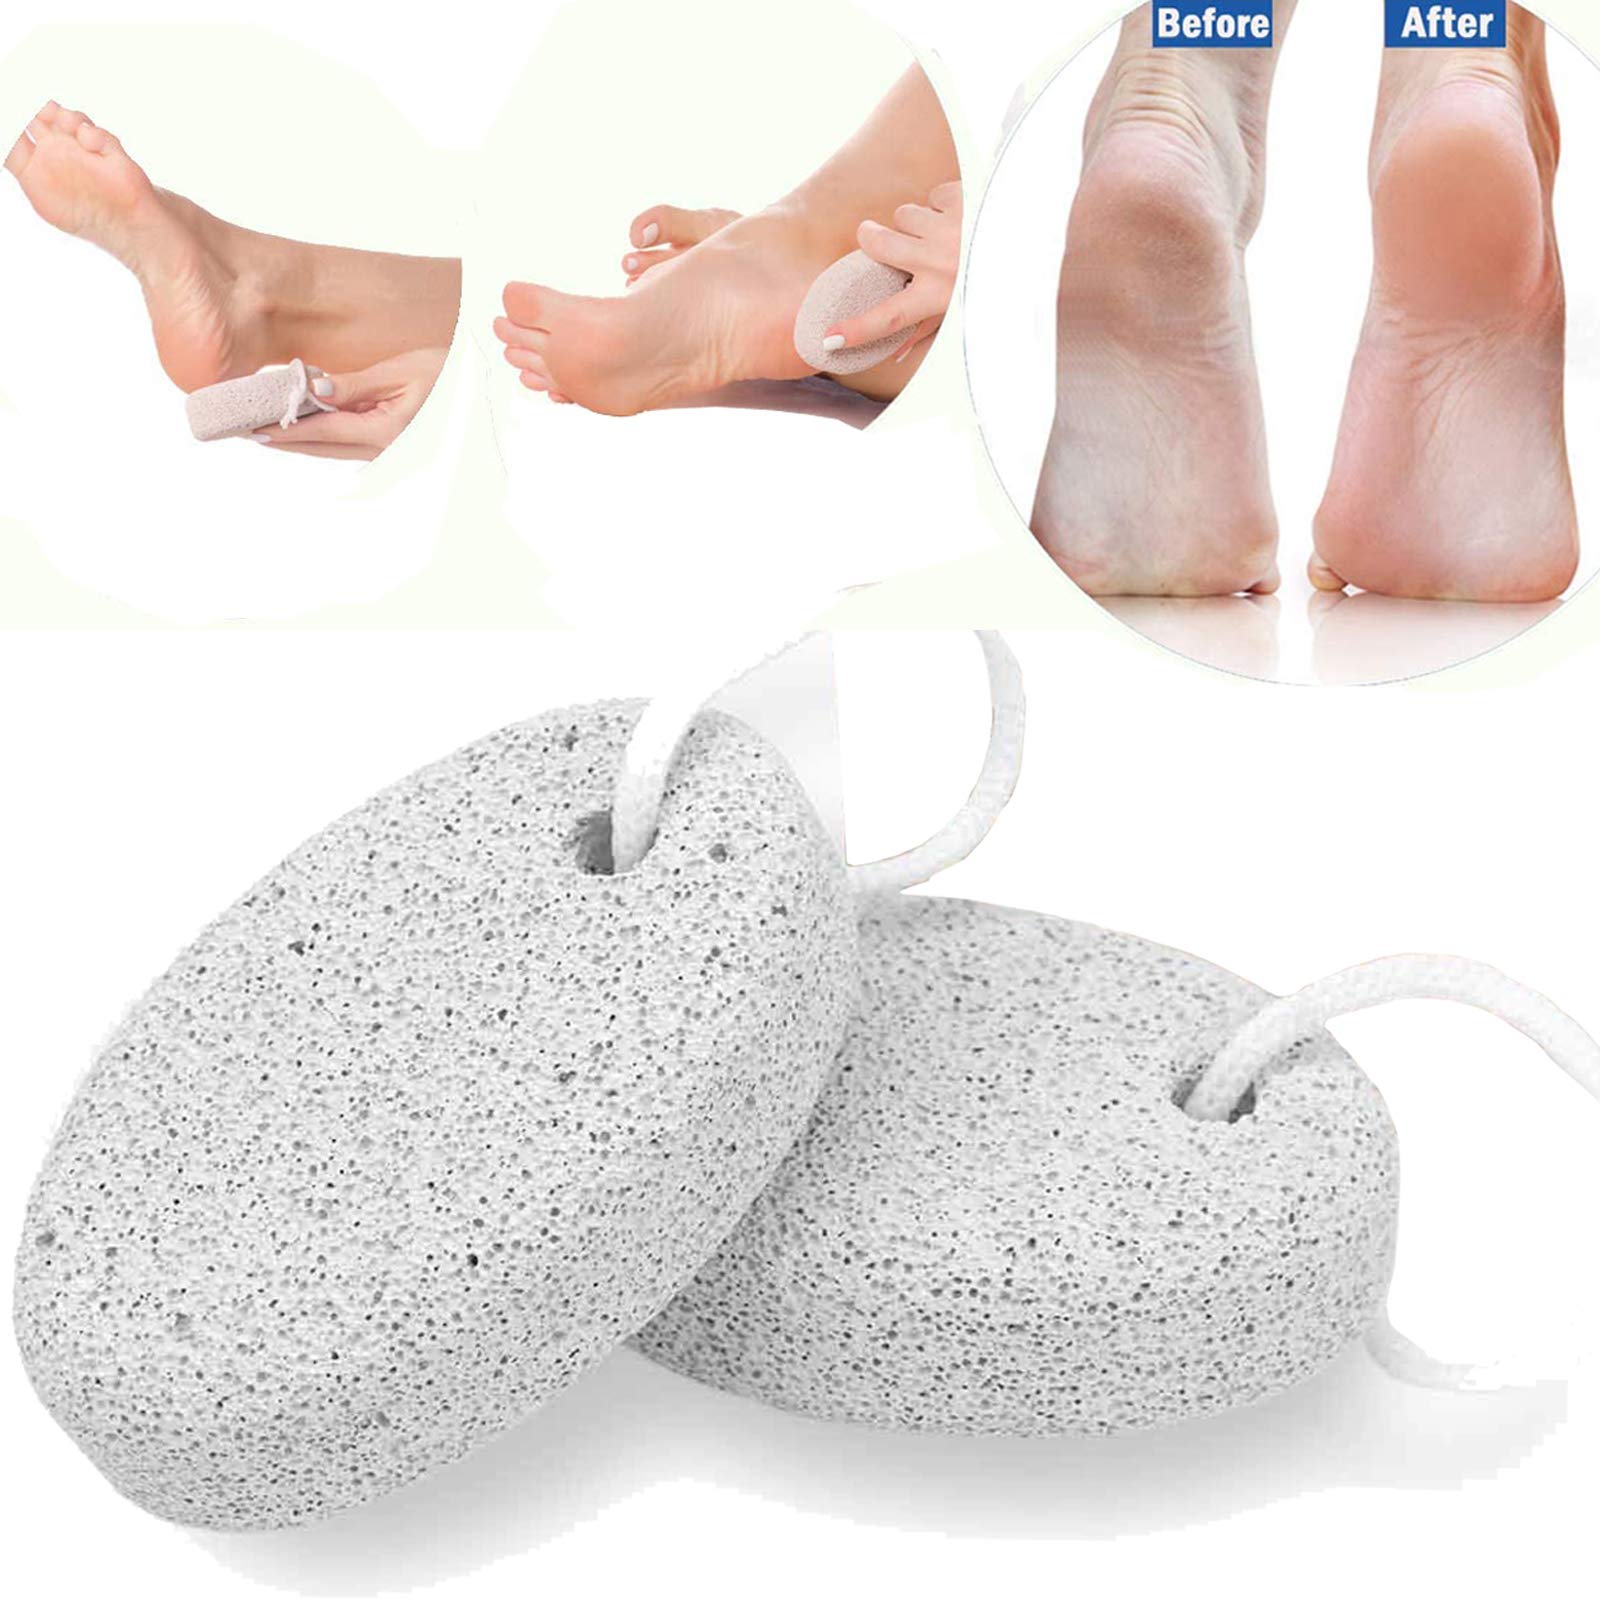 Pumice Stone for Feet 2 PCS Set_Foot Care Natural Pummice Stones for Dead Hard Skin_Foot Scrubber Calluses Removes_Gently Exfoliates Skin_Softer Smoother Heels_Beauty Foot File White Men Women by MUKA